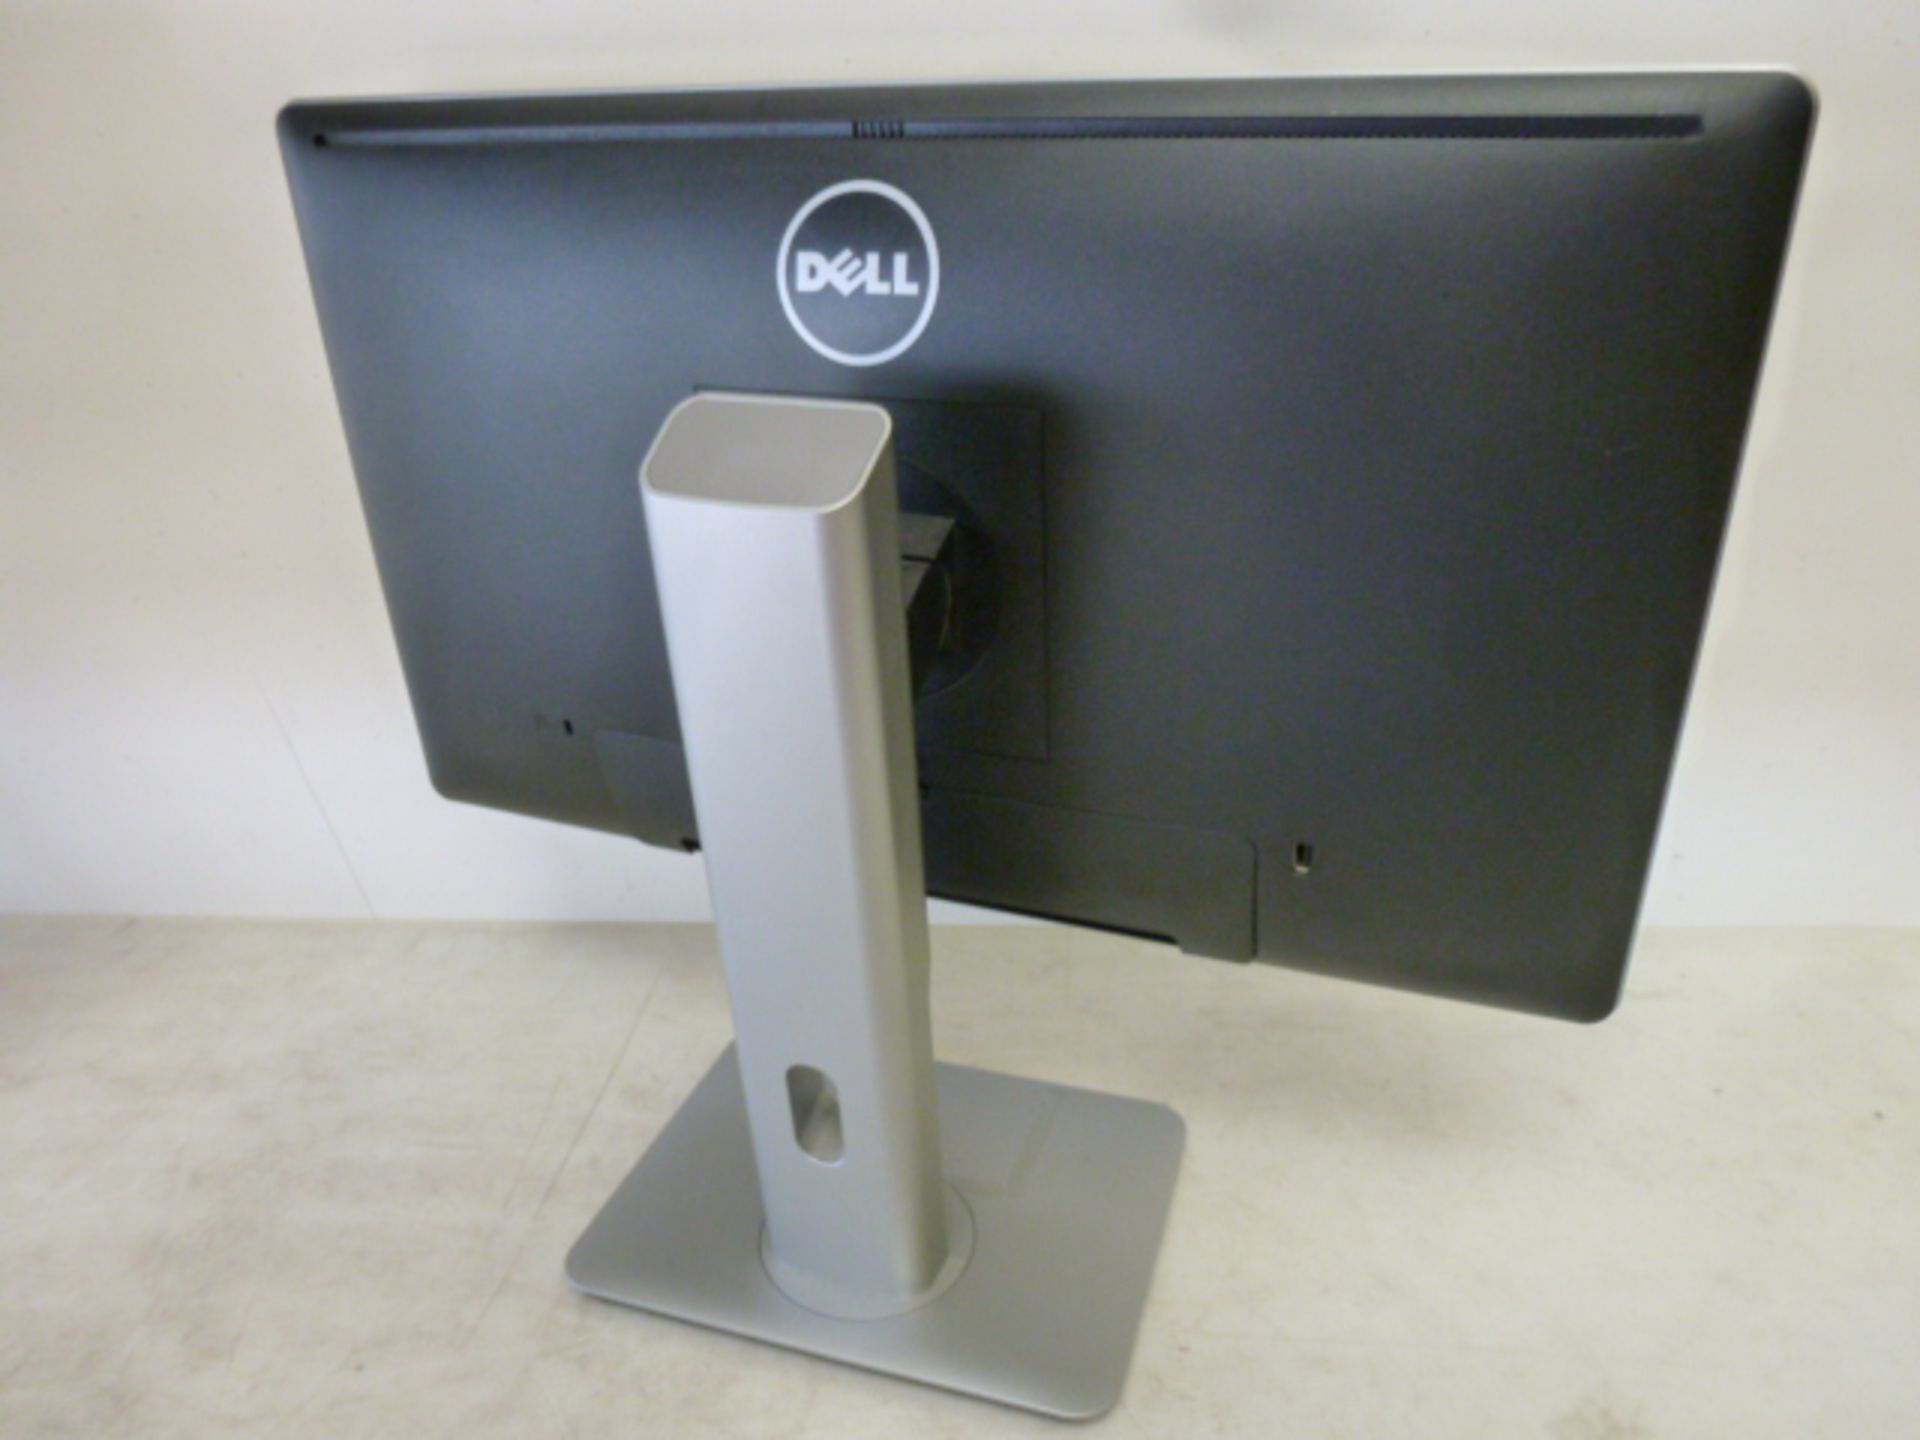 Dell 22" Widescreen LCD Monitor Model P2214Hb. Comes with Power Supply & VGA - Image 2 of 2